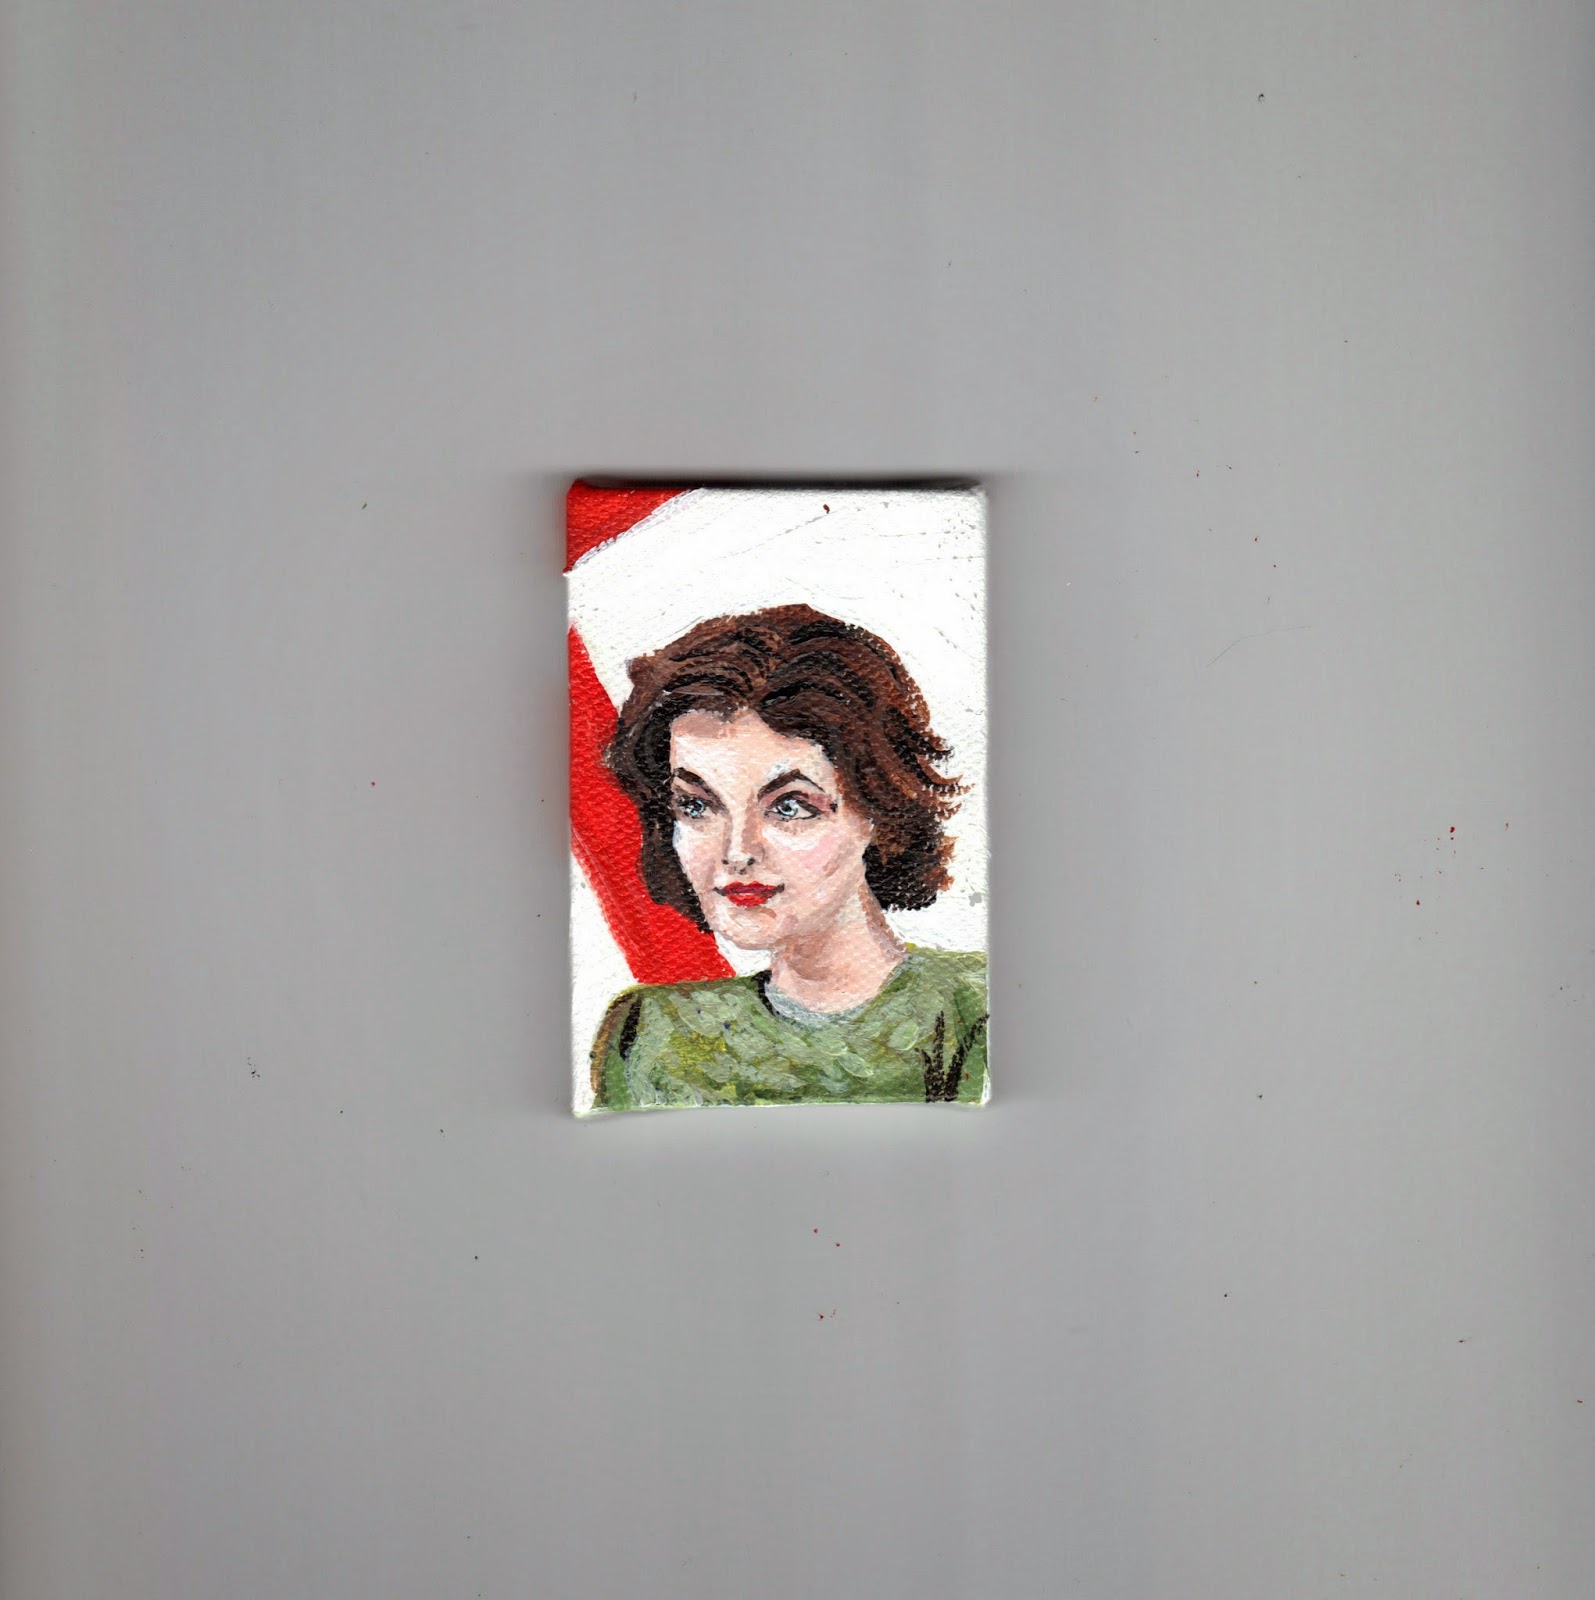 https://www.etsy.com/listing/171729347/miniature-painting-twin-peaks-audrey?ref=shop_home_active_4